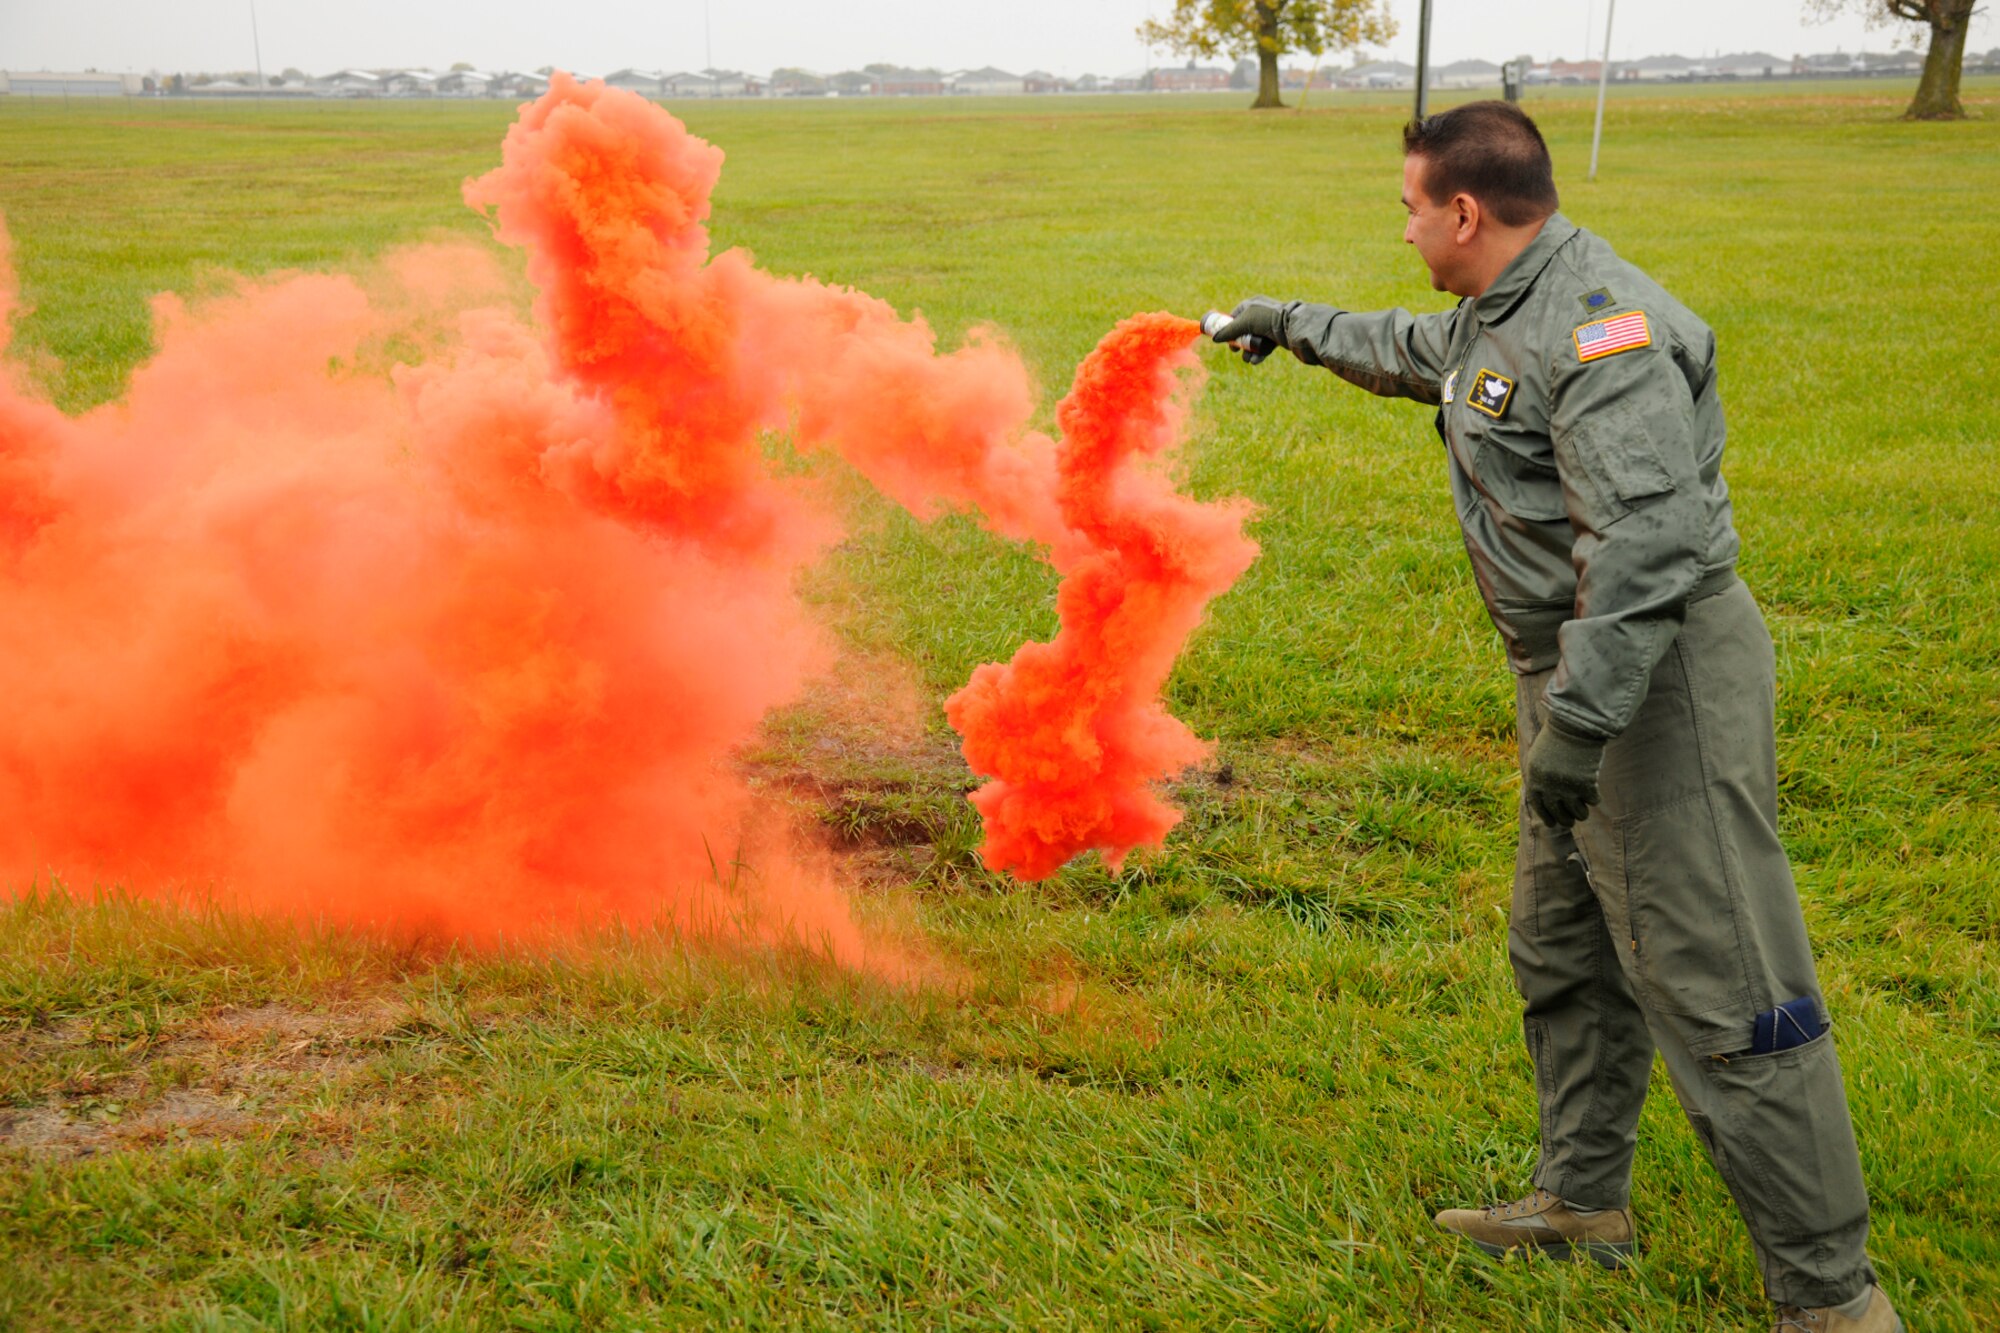 Lt. Col. Paul Beck, a KC-135 Stratotanker pilot with the 171st Air Refueling Squadron uses a smoke canister to mark his location during survival training at Selfridge Air National Guard Base, Mich., Oct. 13, 2012. Air crew personnel with the squadron spent two days working on a series of exercises designed to help them survive a down aircraft scenario and signal for help from a rescue mission. (Air National Guard photo by TSgt. David Kujawa)